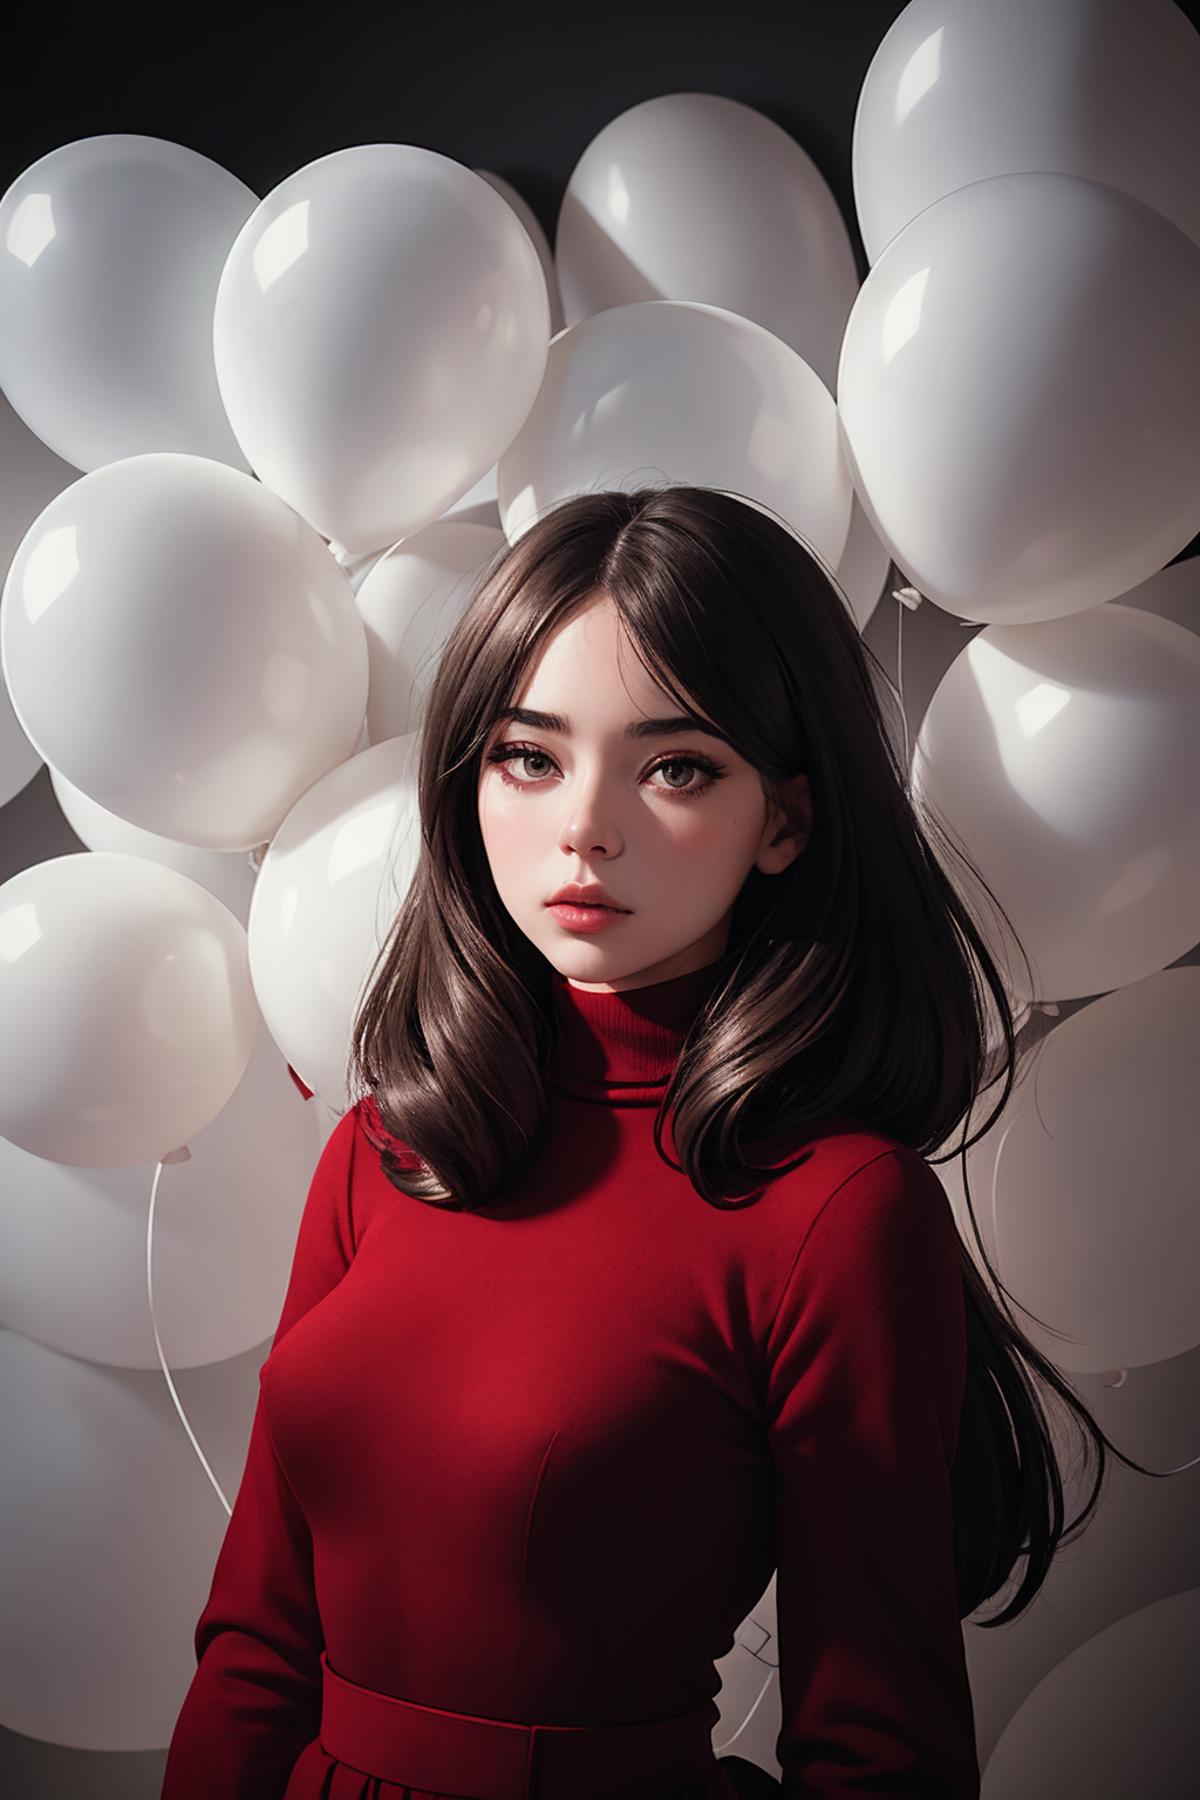 Artistic Portrait of a Woman in a Red Sweater with White Balloons in the Background